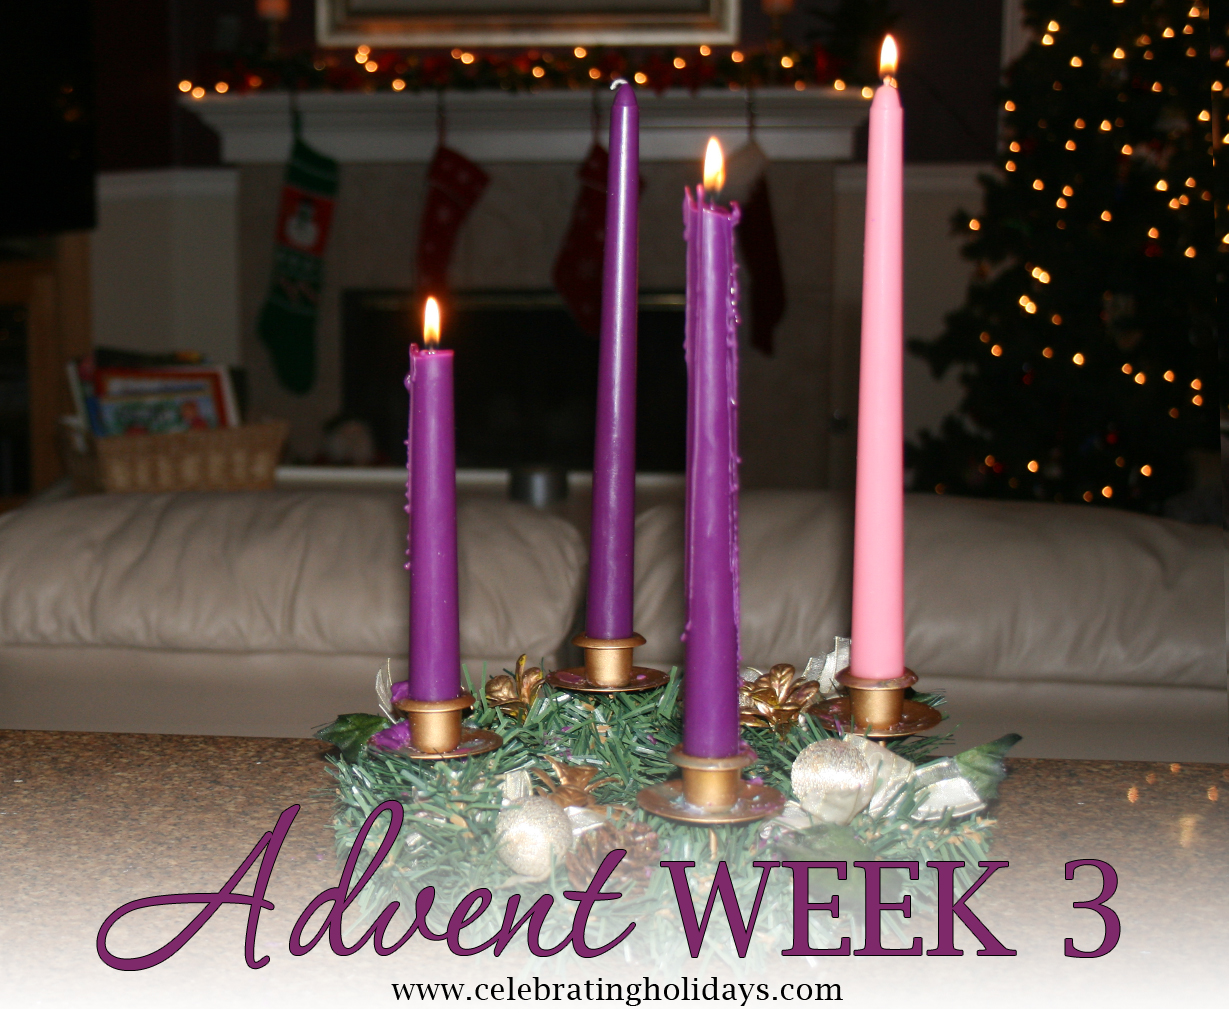 Advent Week 3 Reading, Music, and Candle Lighting